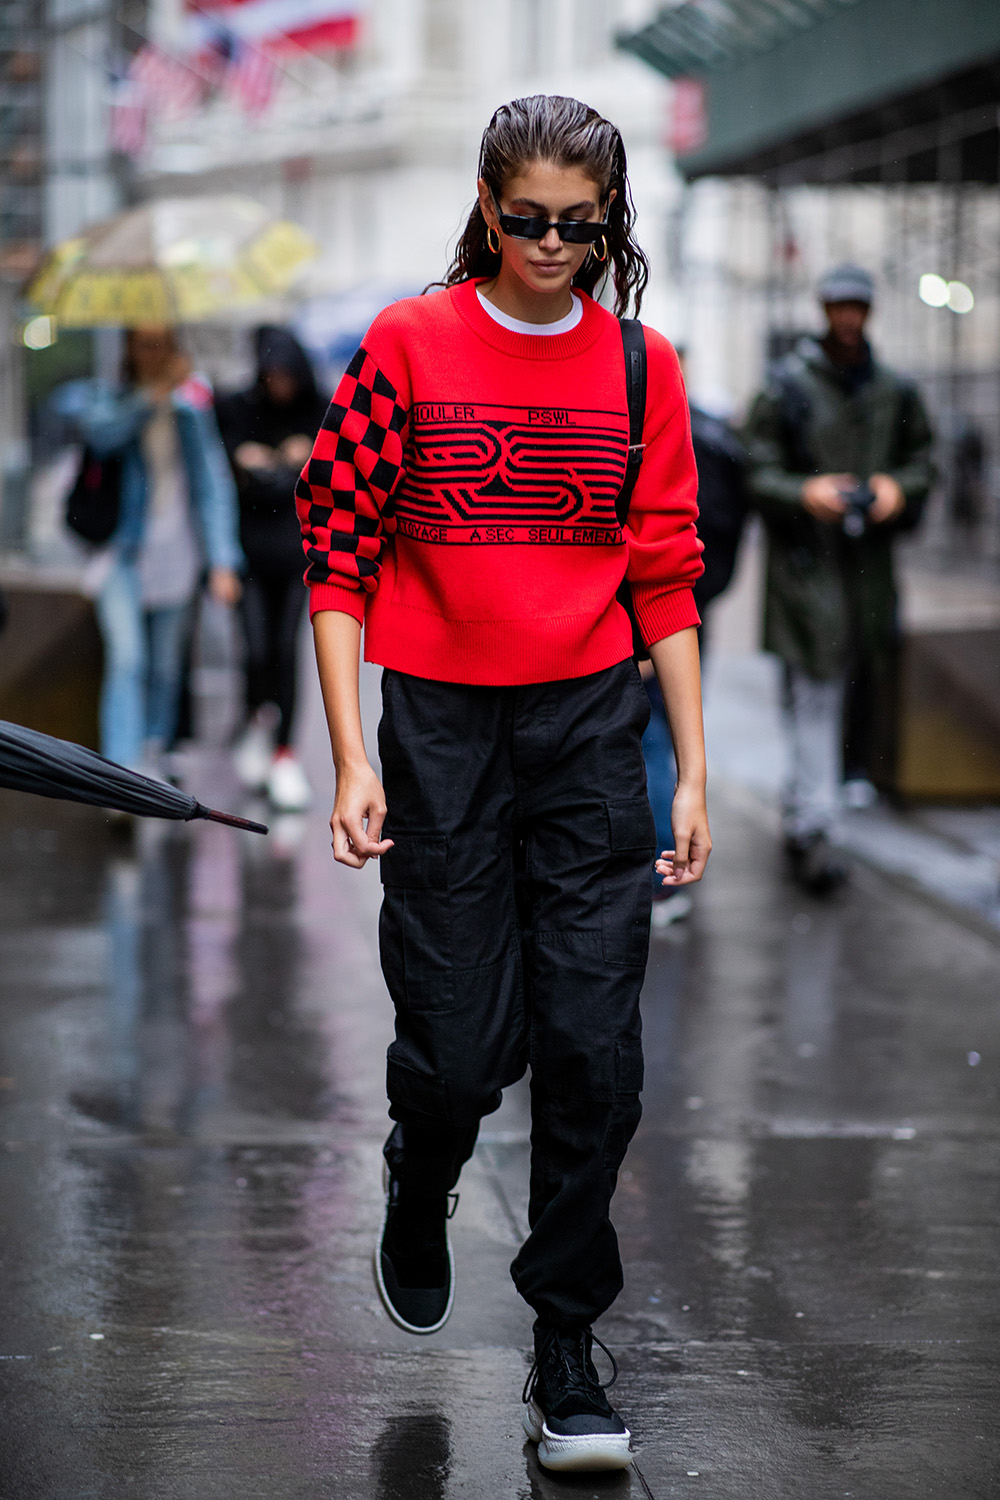 Precious Cargo: The practical pant trend that’s replacing your mom jeans (and fast) | NEW YORK, NY - SEPTEMBER 10: Model Kaia Gerber wearing red sweater, black pants is seen outside Proenza Schouler during New York Fashion Week Spring/Summer 2019 on September 10, 2018 in New York City. (Photo by Christian Vierig/Getty Images)